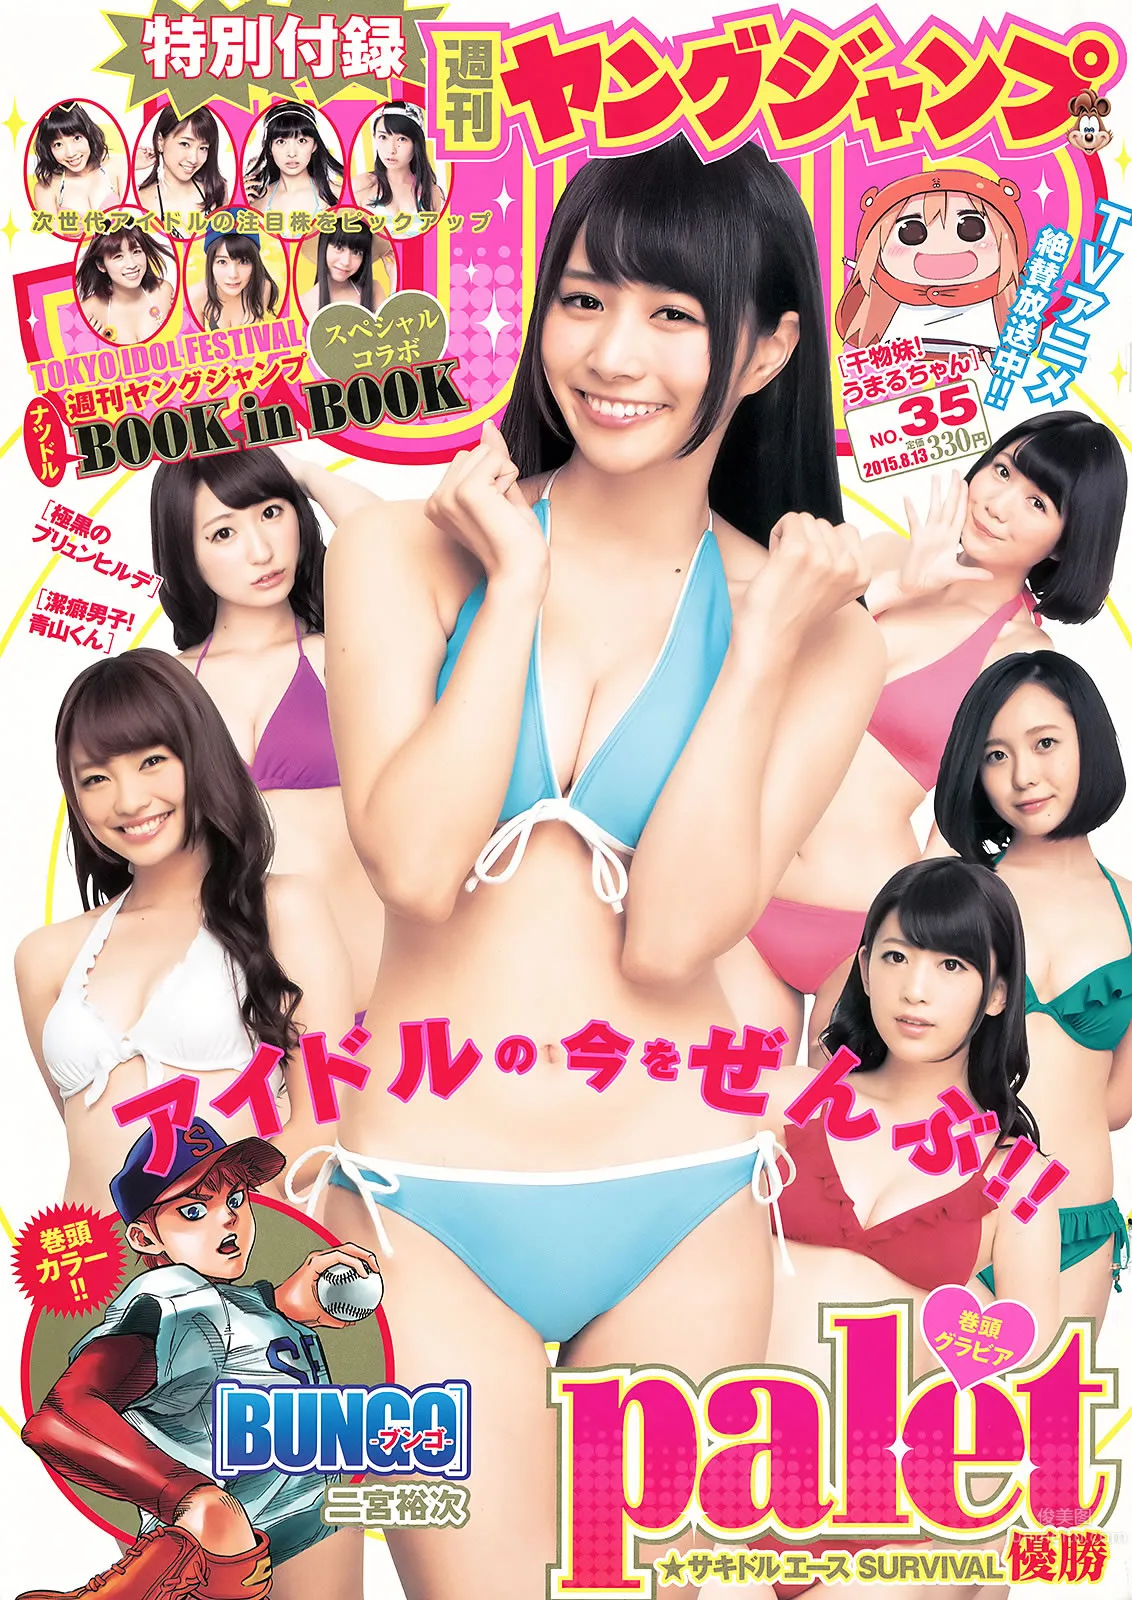 [Weekly Young Jump] 2015 No.35-37 palet 他 木﨑ゆりあ 岡田奈々_1